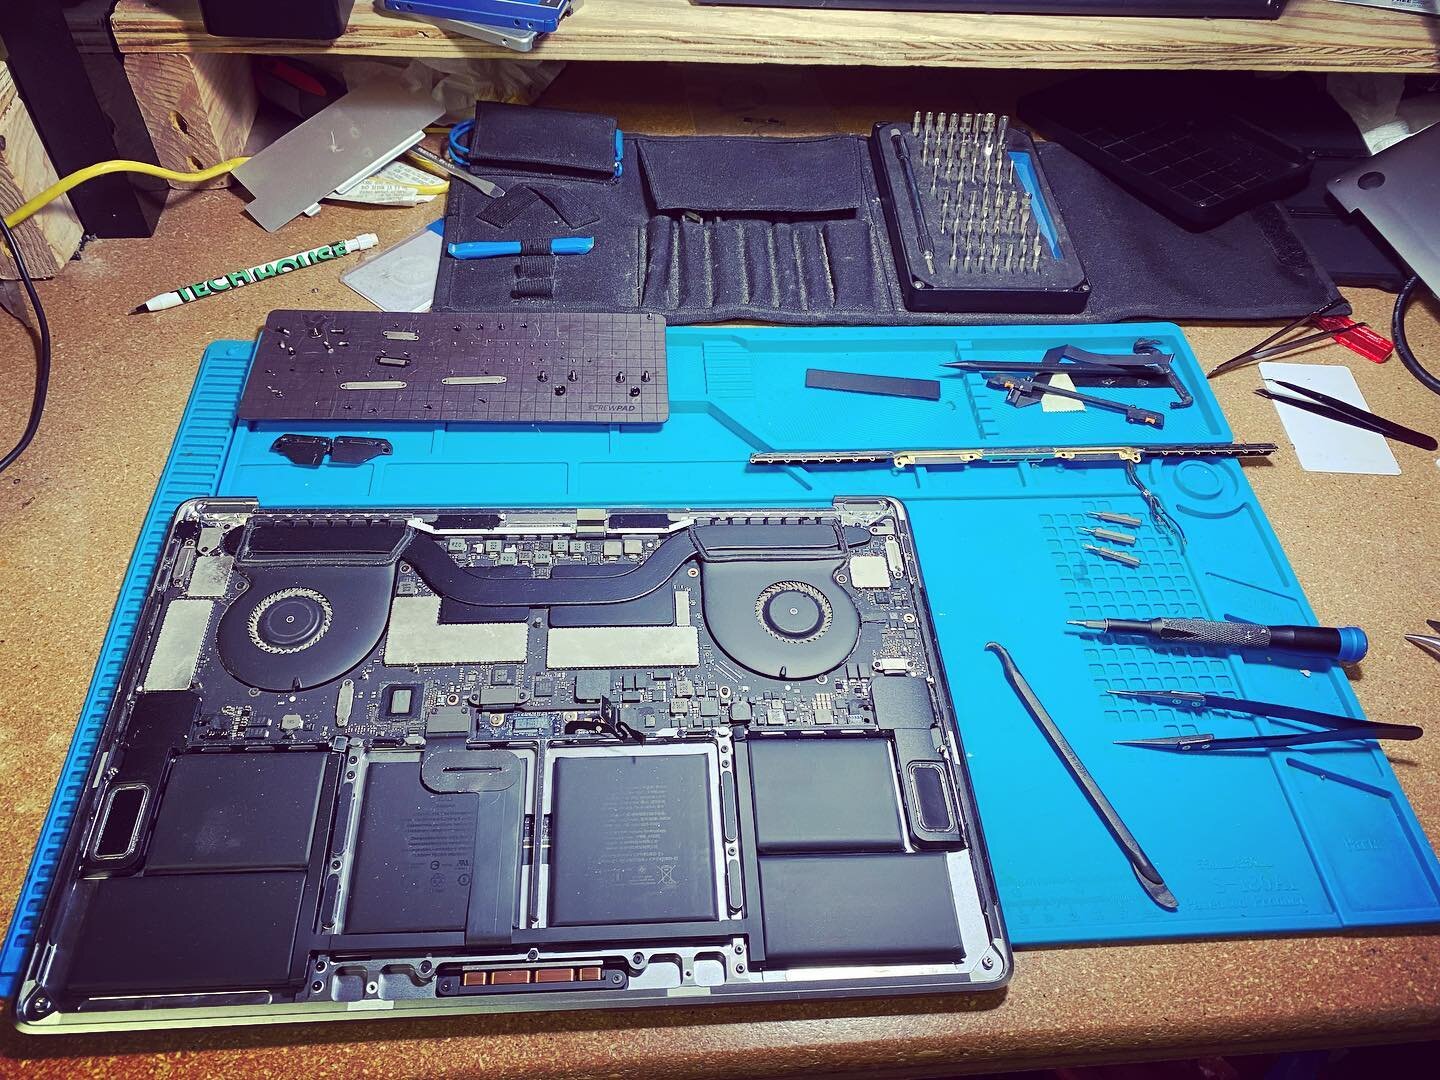 All in a days work. Happy Friday everyone! Tech House wanting to wish everyone a fun and safe weekend 🤓🌞
&mdash;&mdash;&mdash;&gt; swipe to see how we keep all our tiny screws organized while working on computers!
#macrepair #downtownavl #bestofwnc